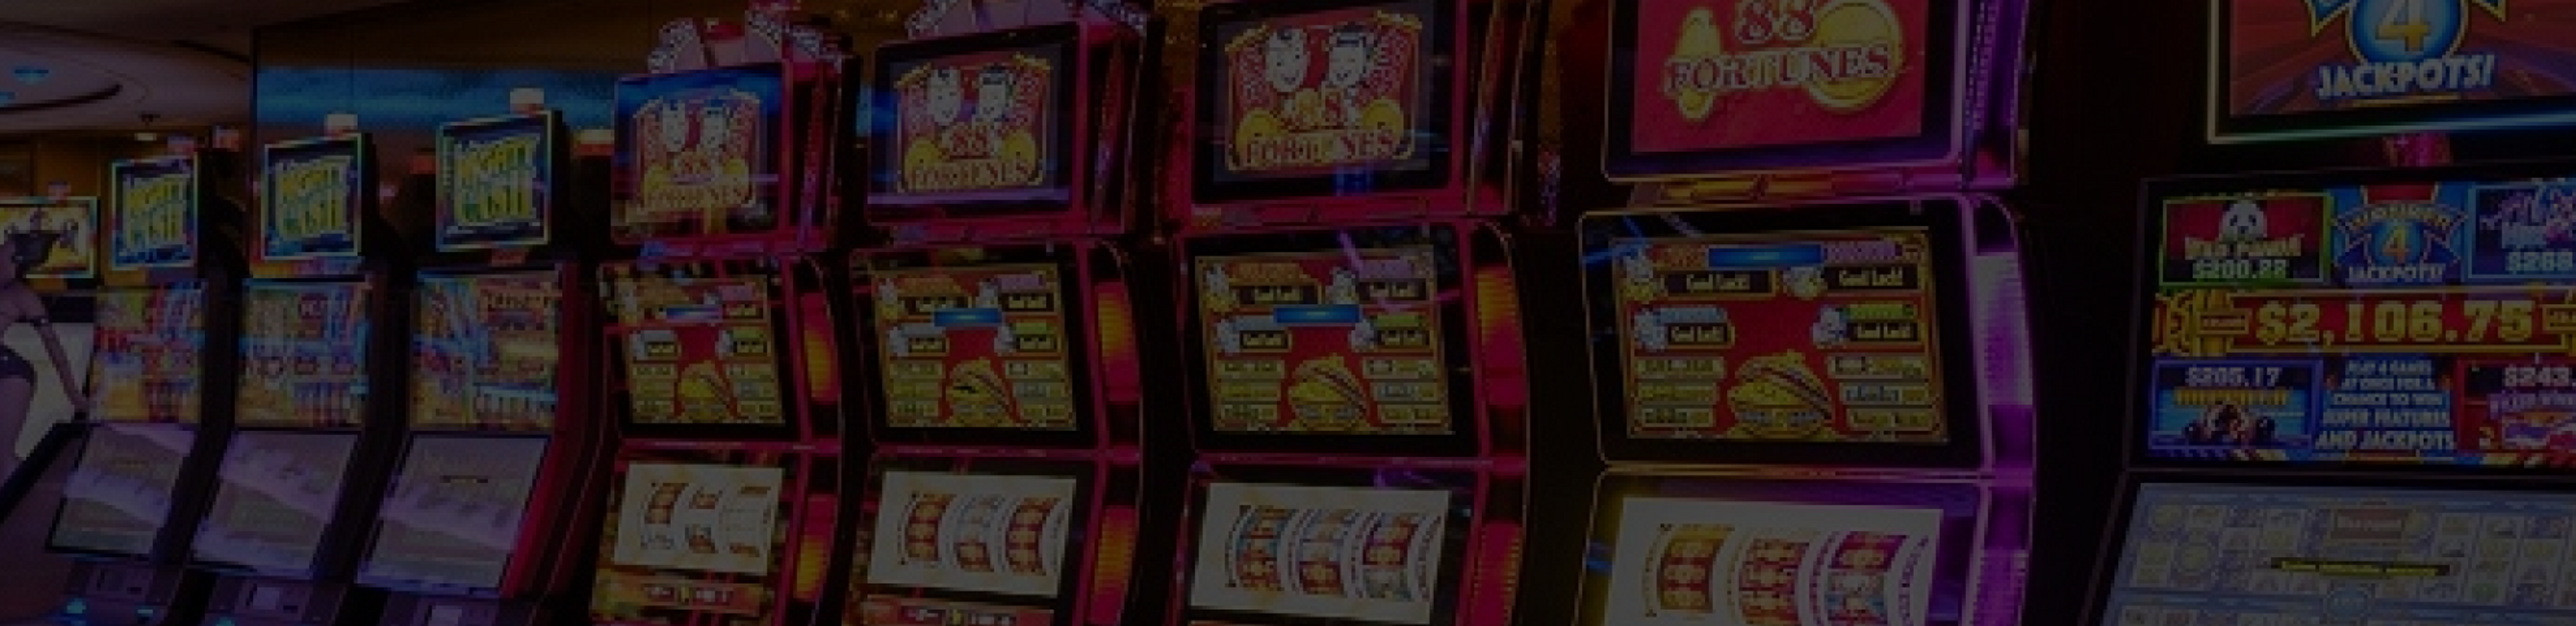 Slots Casino Review Banner